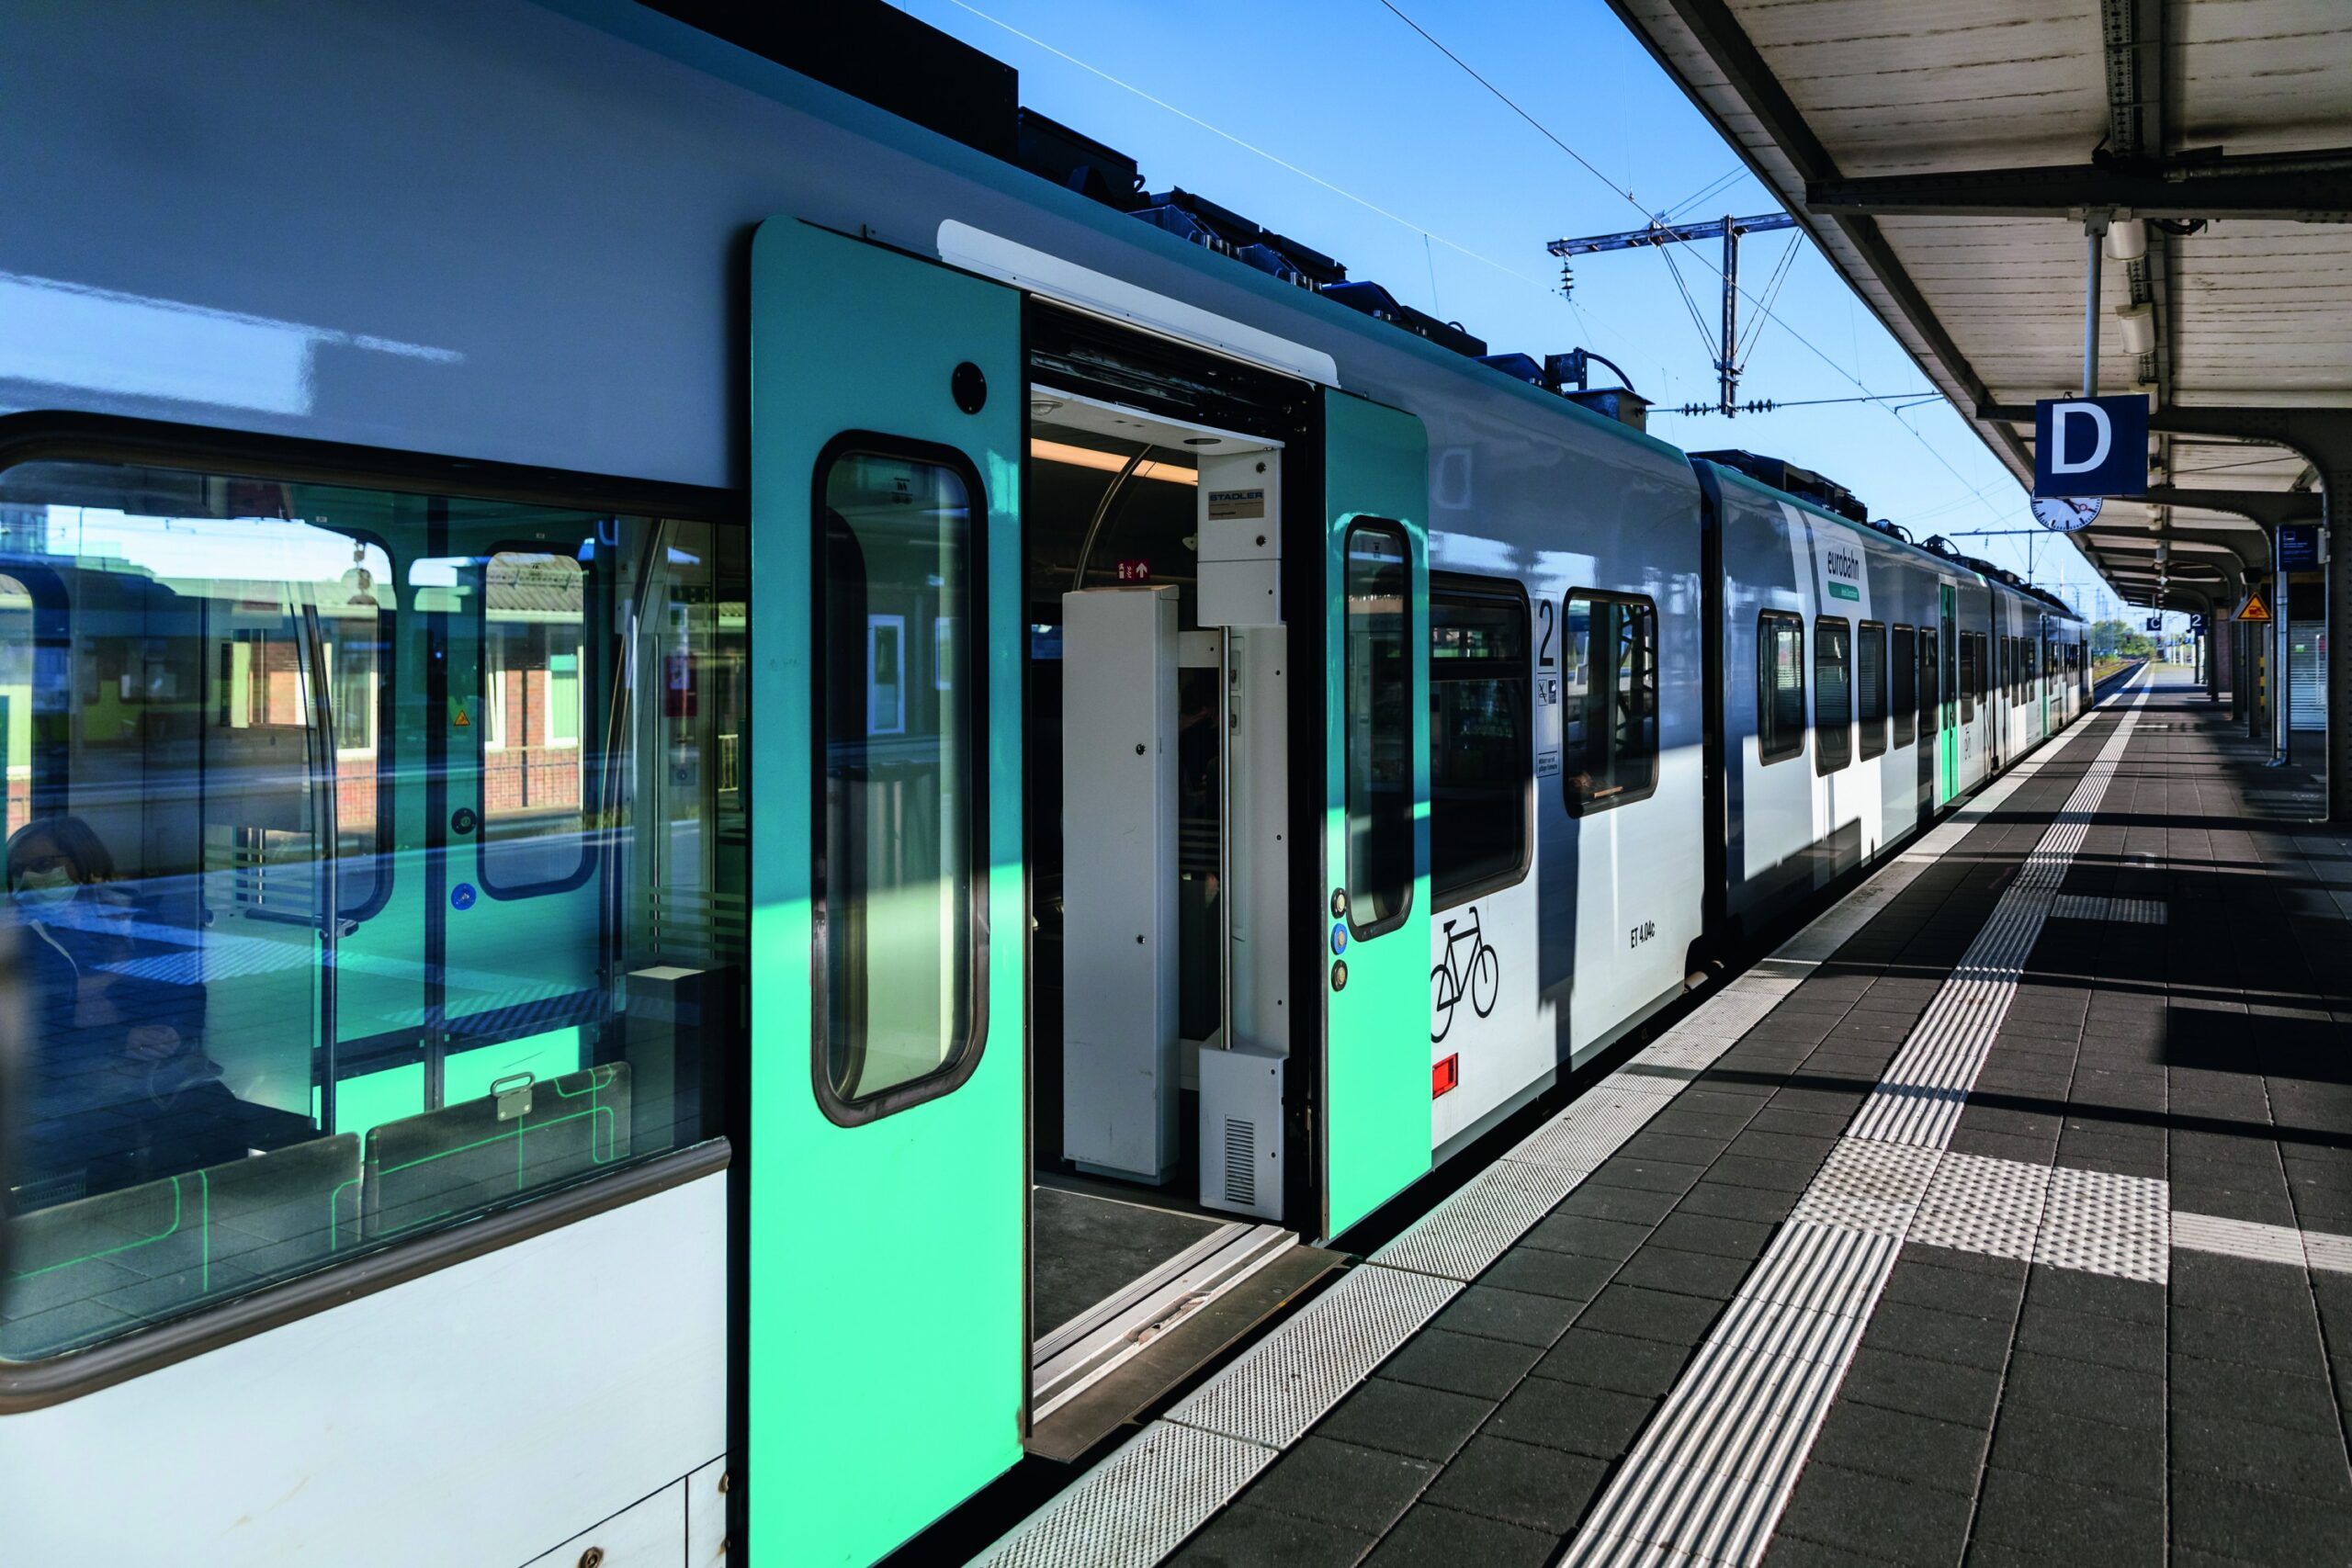 The aim of the Deutschlandtakt is to better coordinate trains and reduce travel times